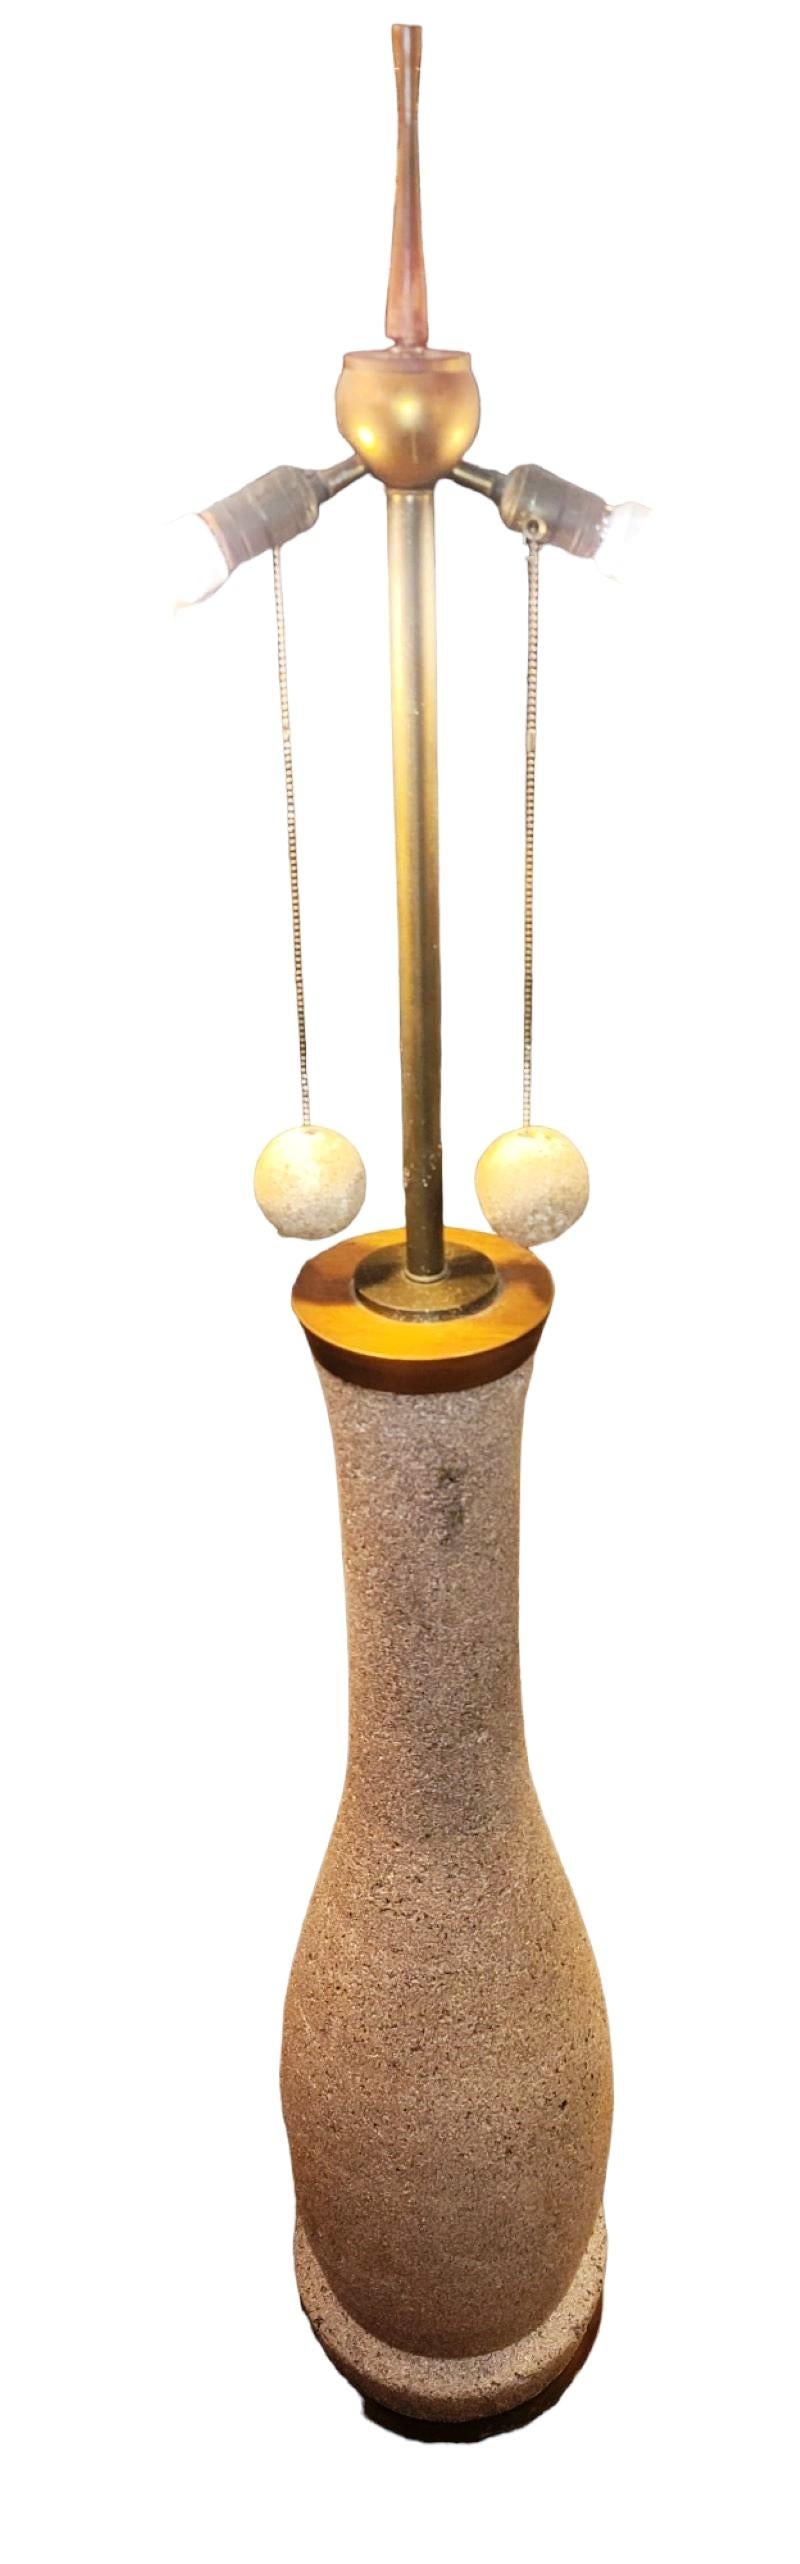 Milo Baughman corked floor lamp design With Wooden Base. Double light design with pull on/ pull off mechanism. Lights are tested and in working condition as shown in the added video.